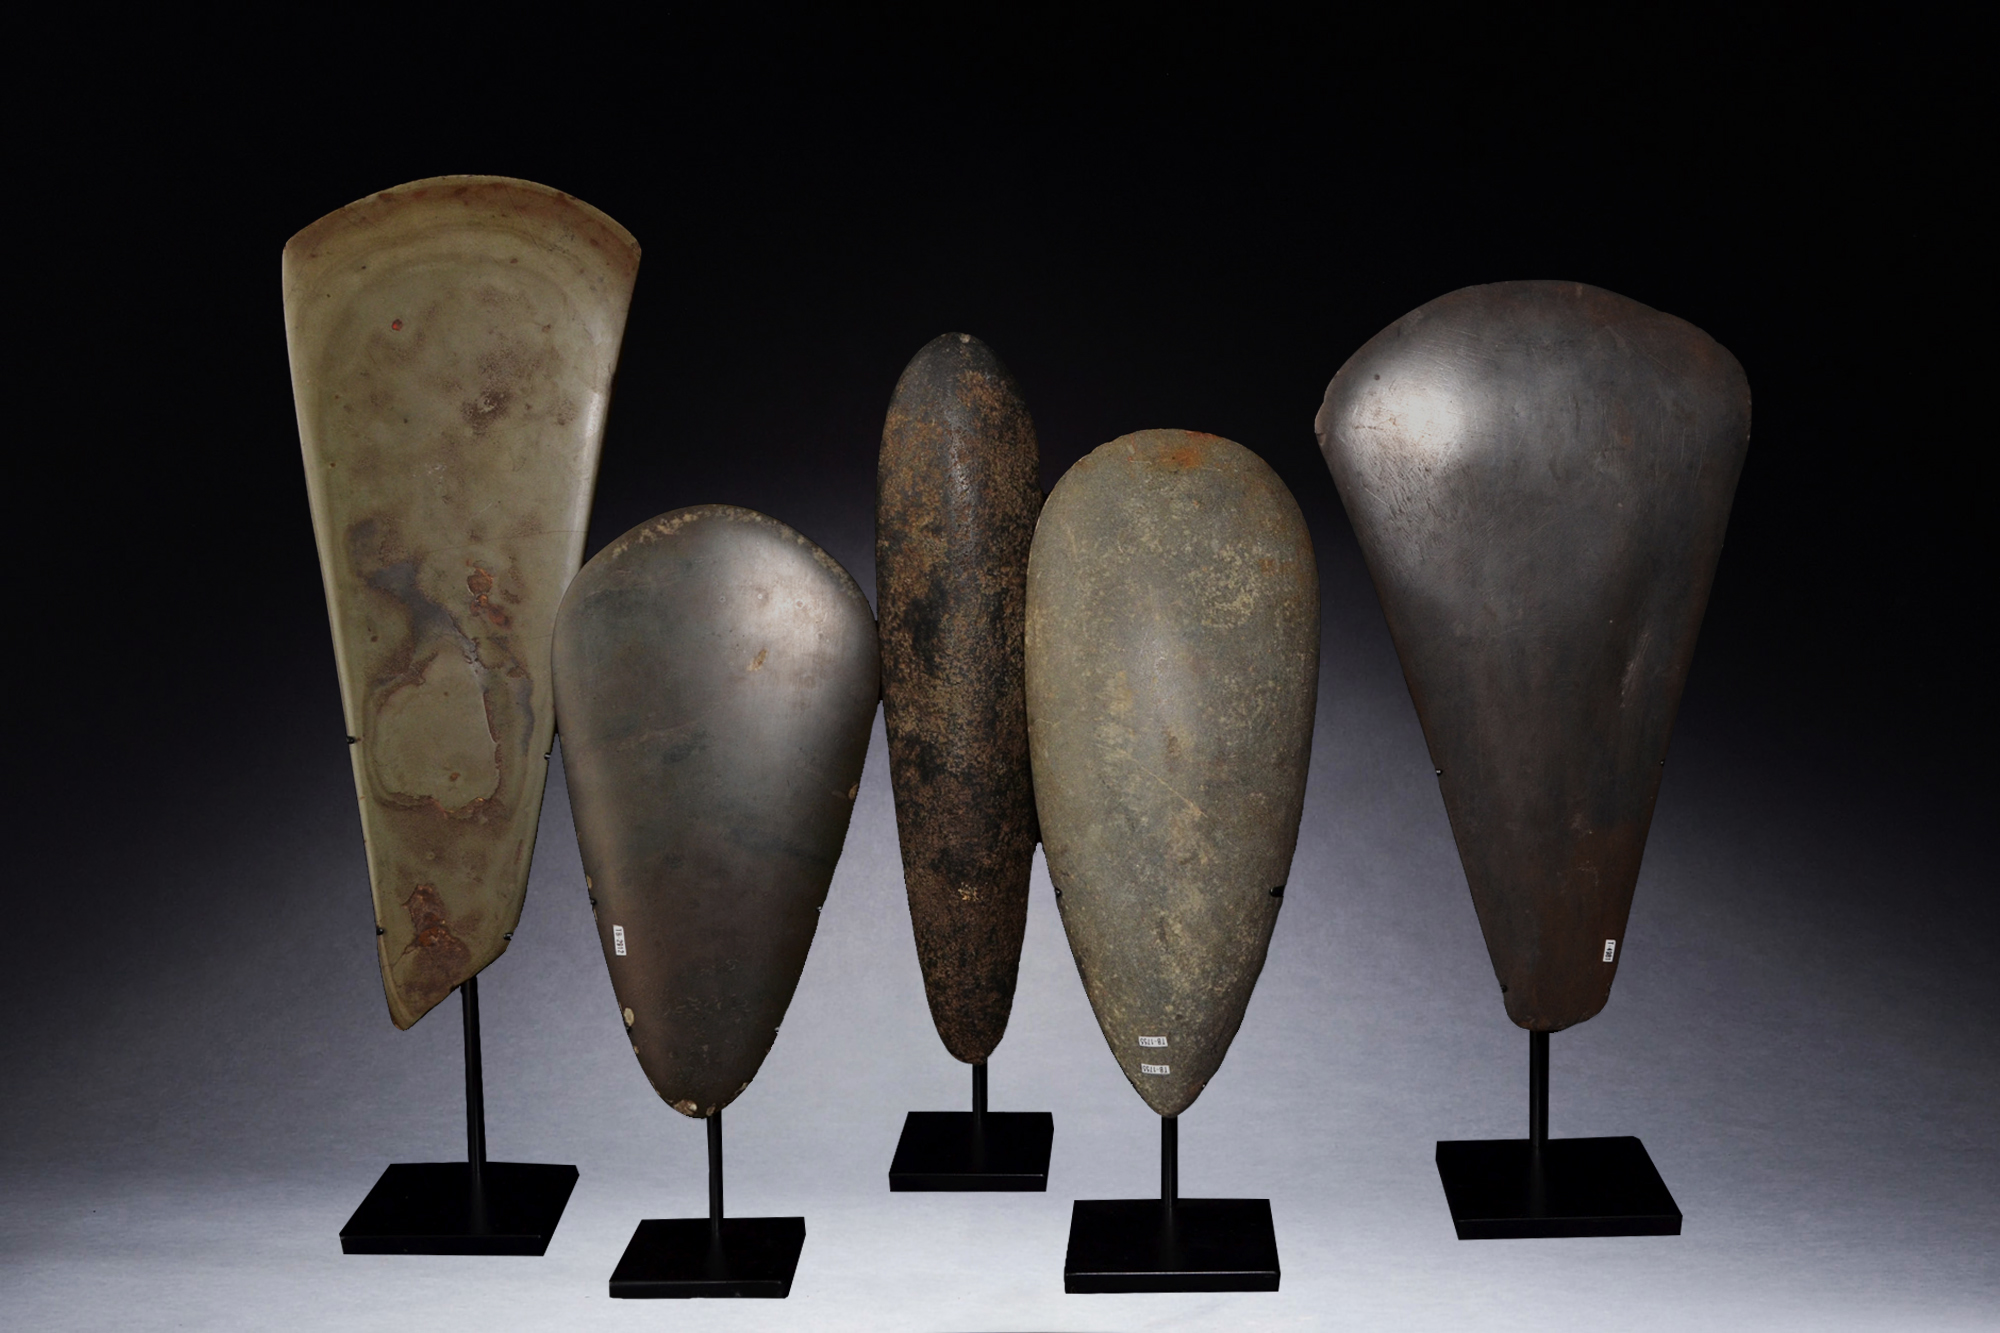 A Superb Collection of Old New Guinea Stone Axes Highlands of Papua New Guinea